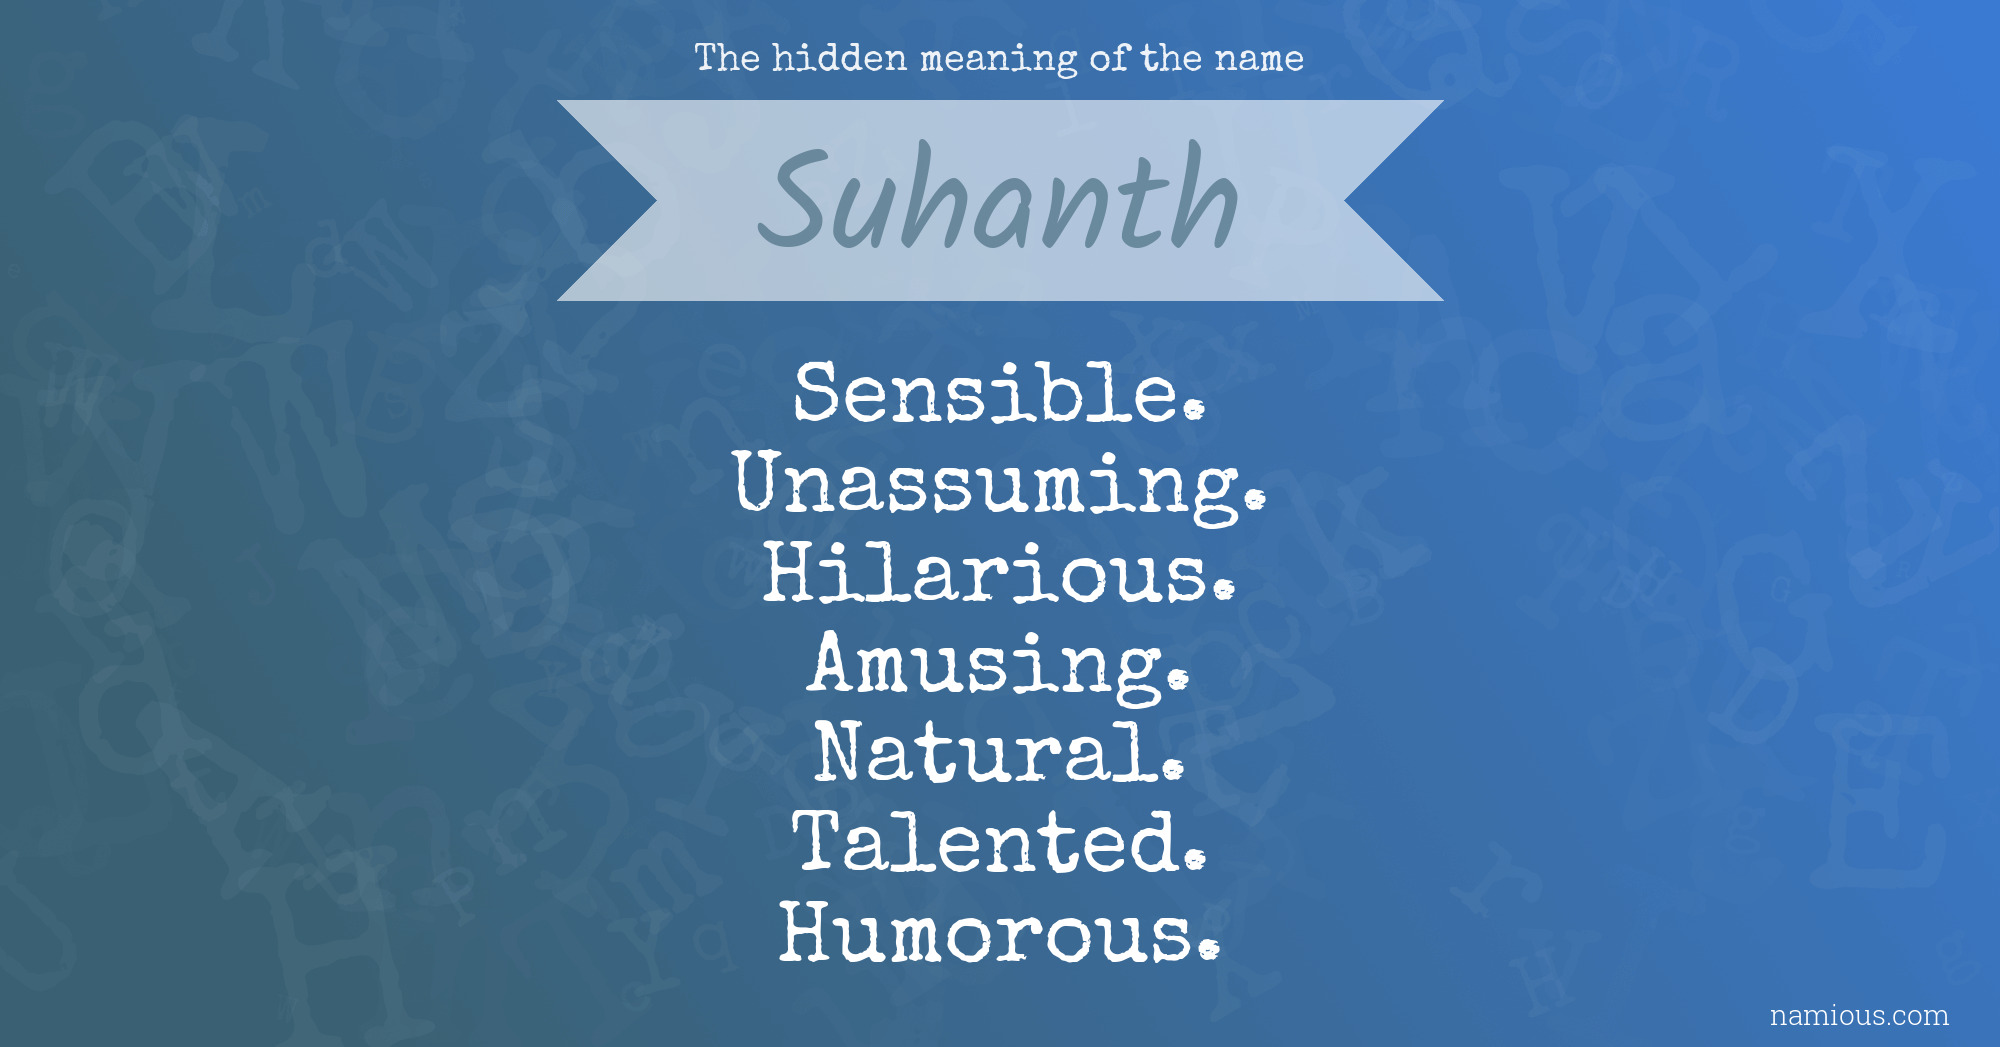 The hidden meaning of the name Suhanth